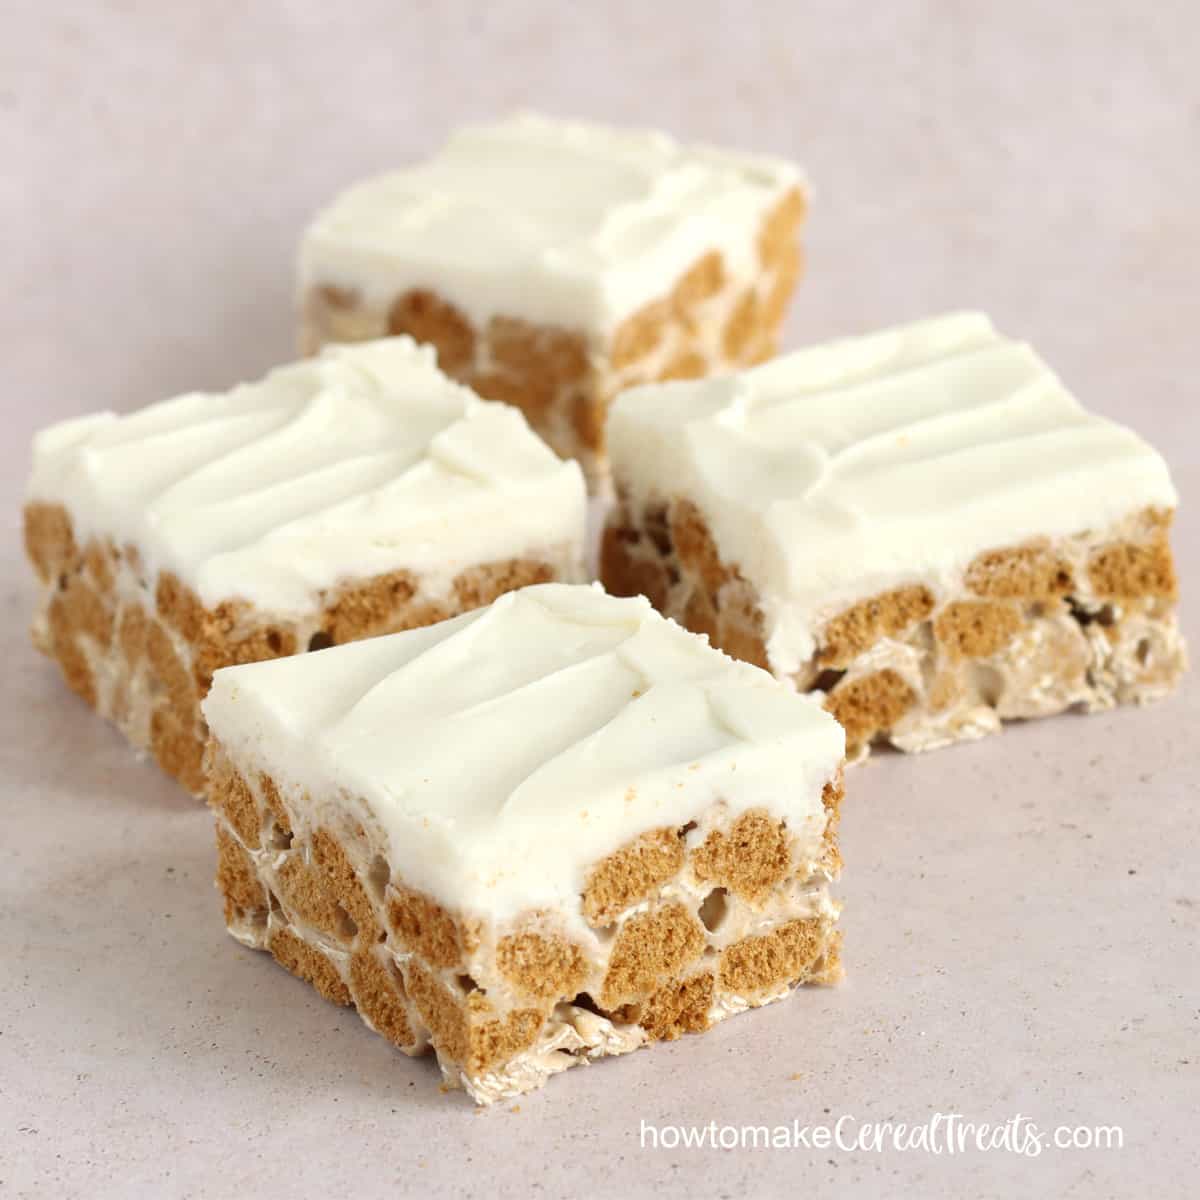 Frosted oatmeal cream pie cereal bars made with Little Debbie cereal.